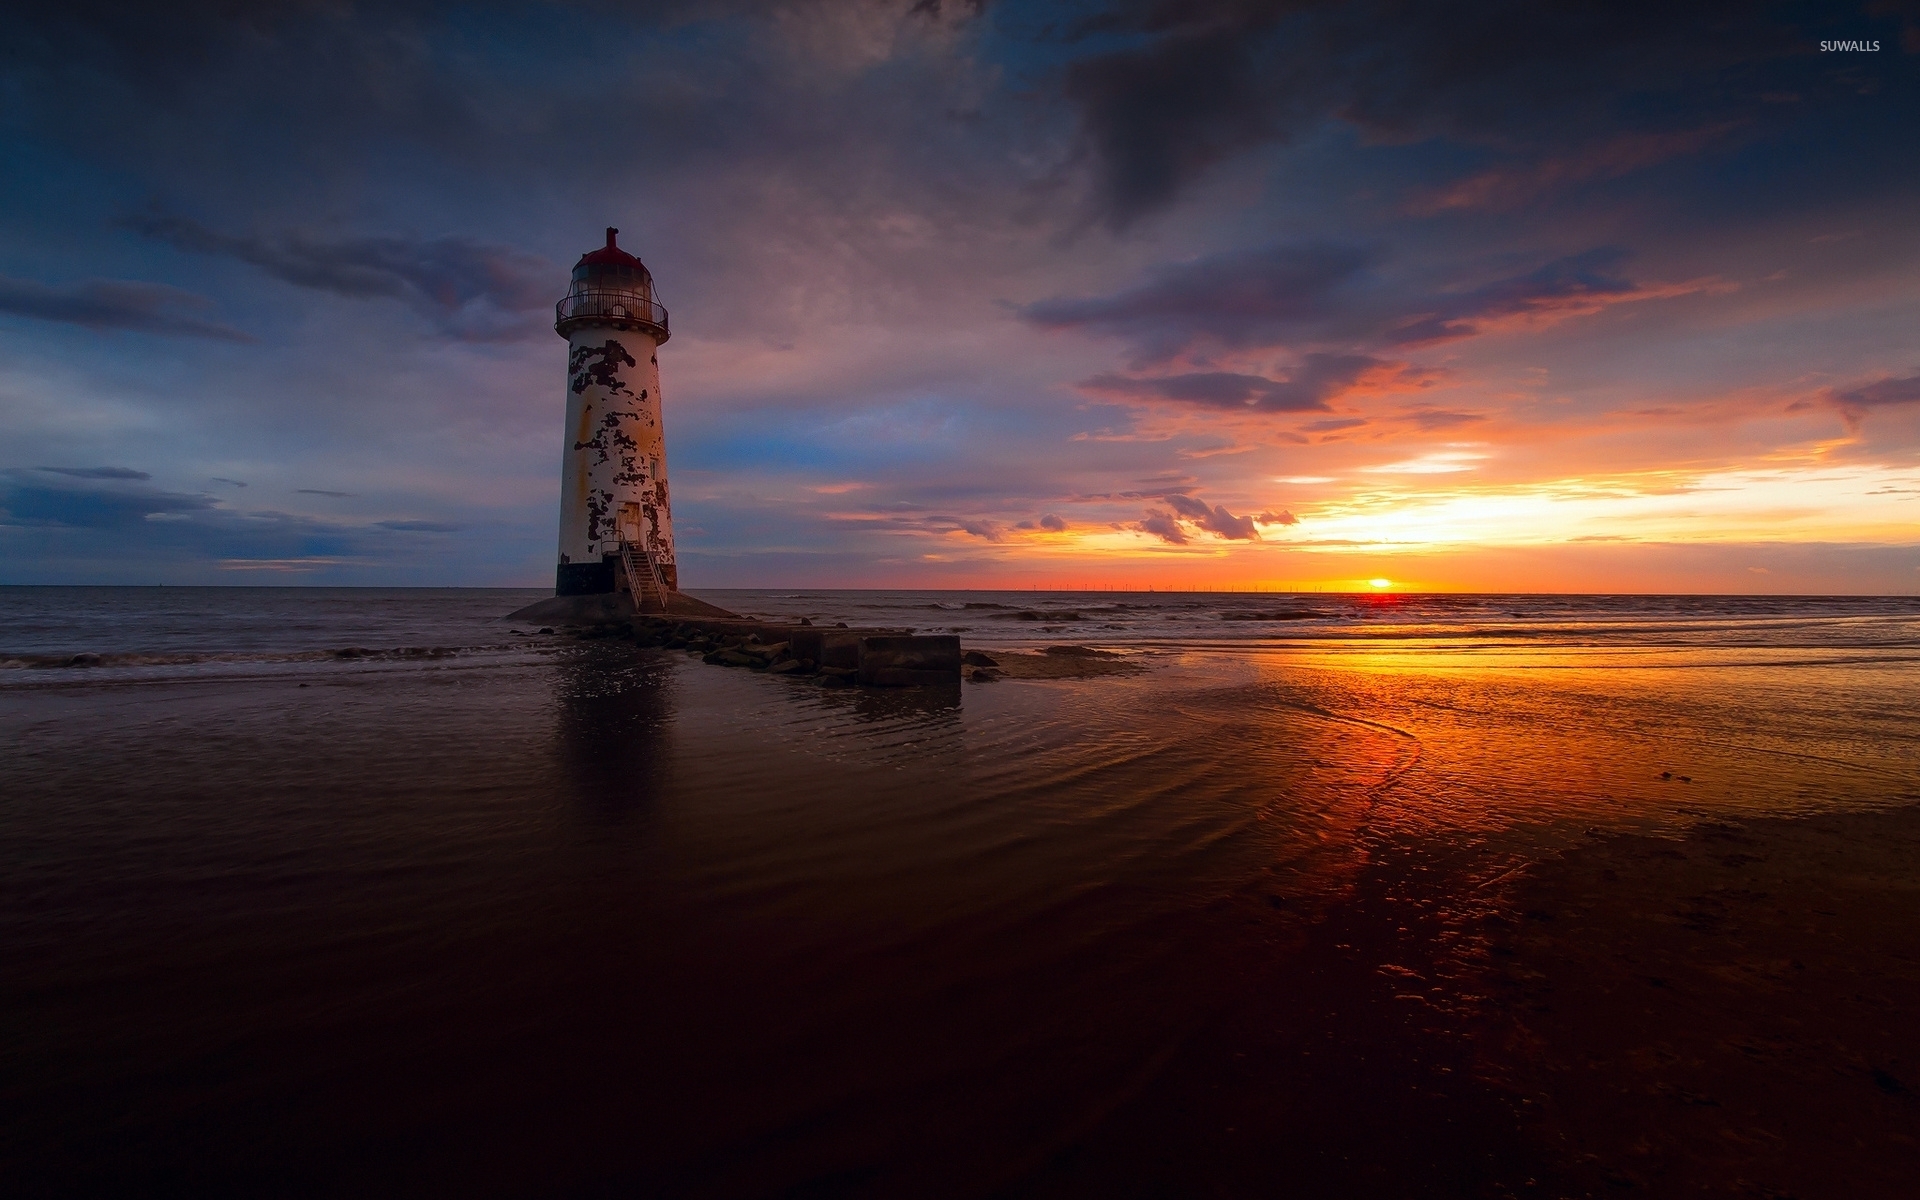 Abandoned lighthouse with a great view of the ocean sunset